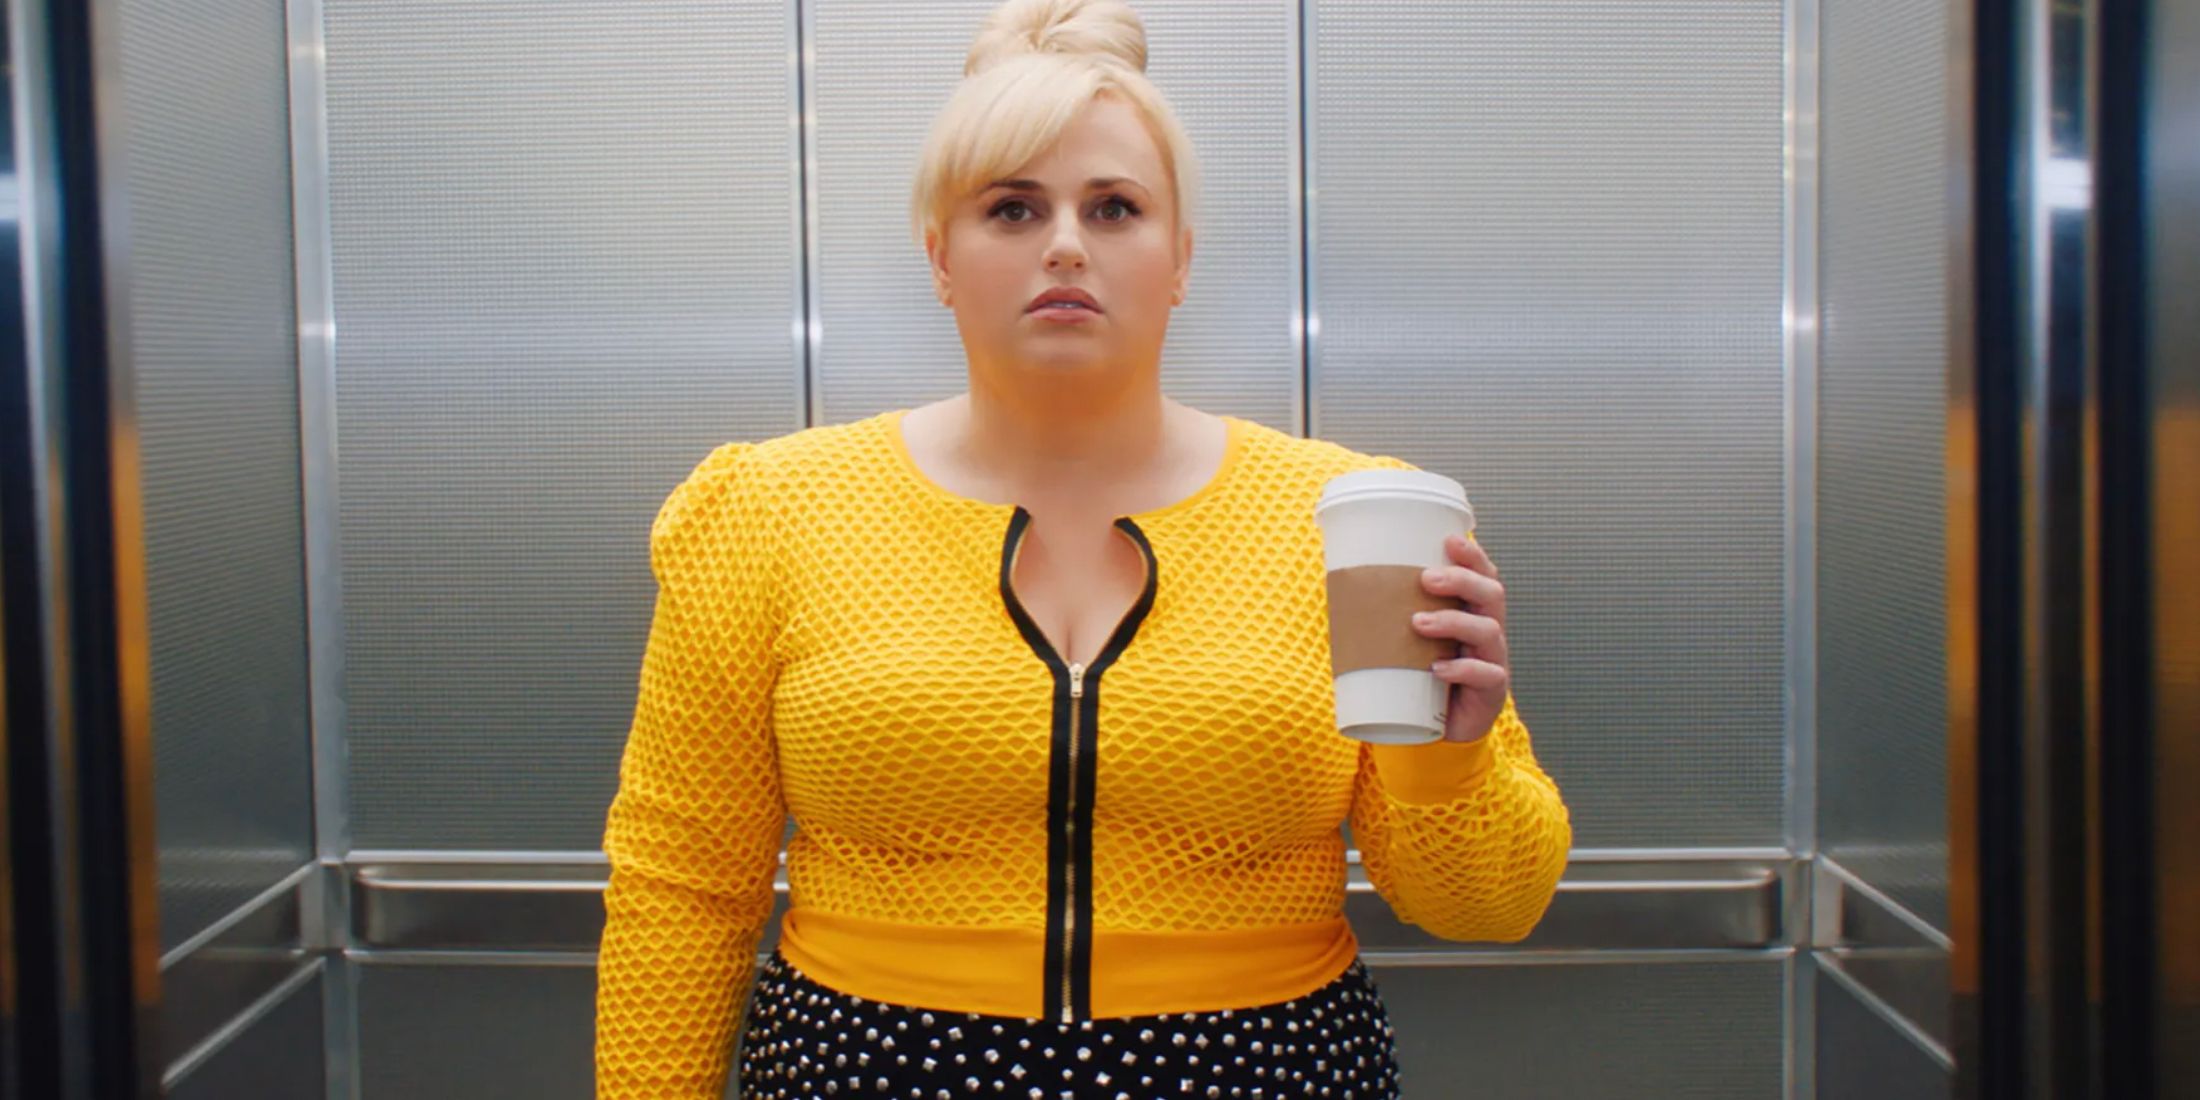 Rebel Wilson in a bright yellow top and holding a coffee cup in the elevator in Isnt It Romantic